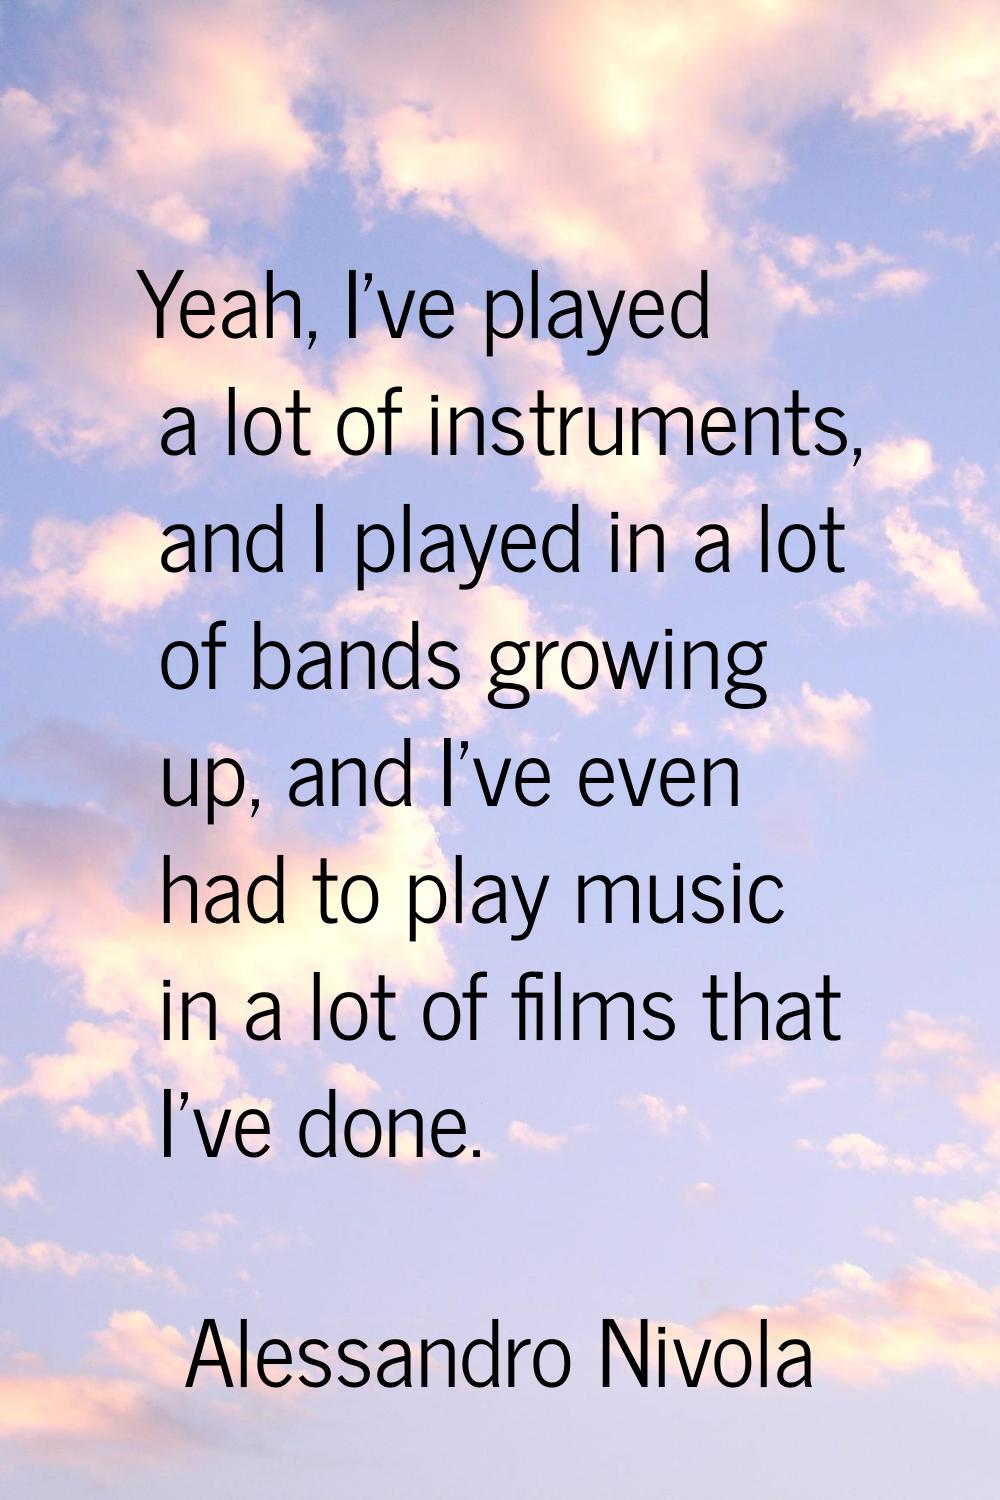 Yeah, I've played a lot of instruments, and I played in a lot of bands growing up, and I've even ha